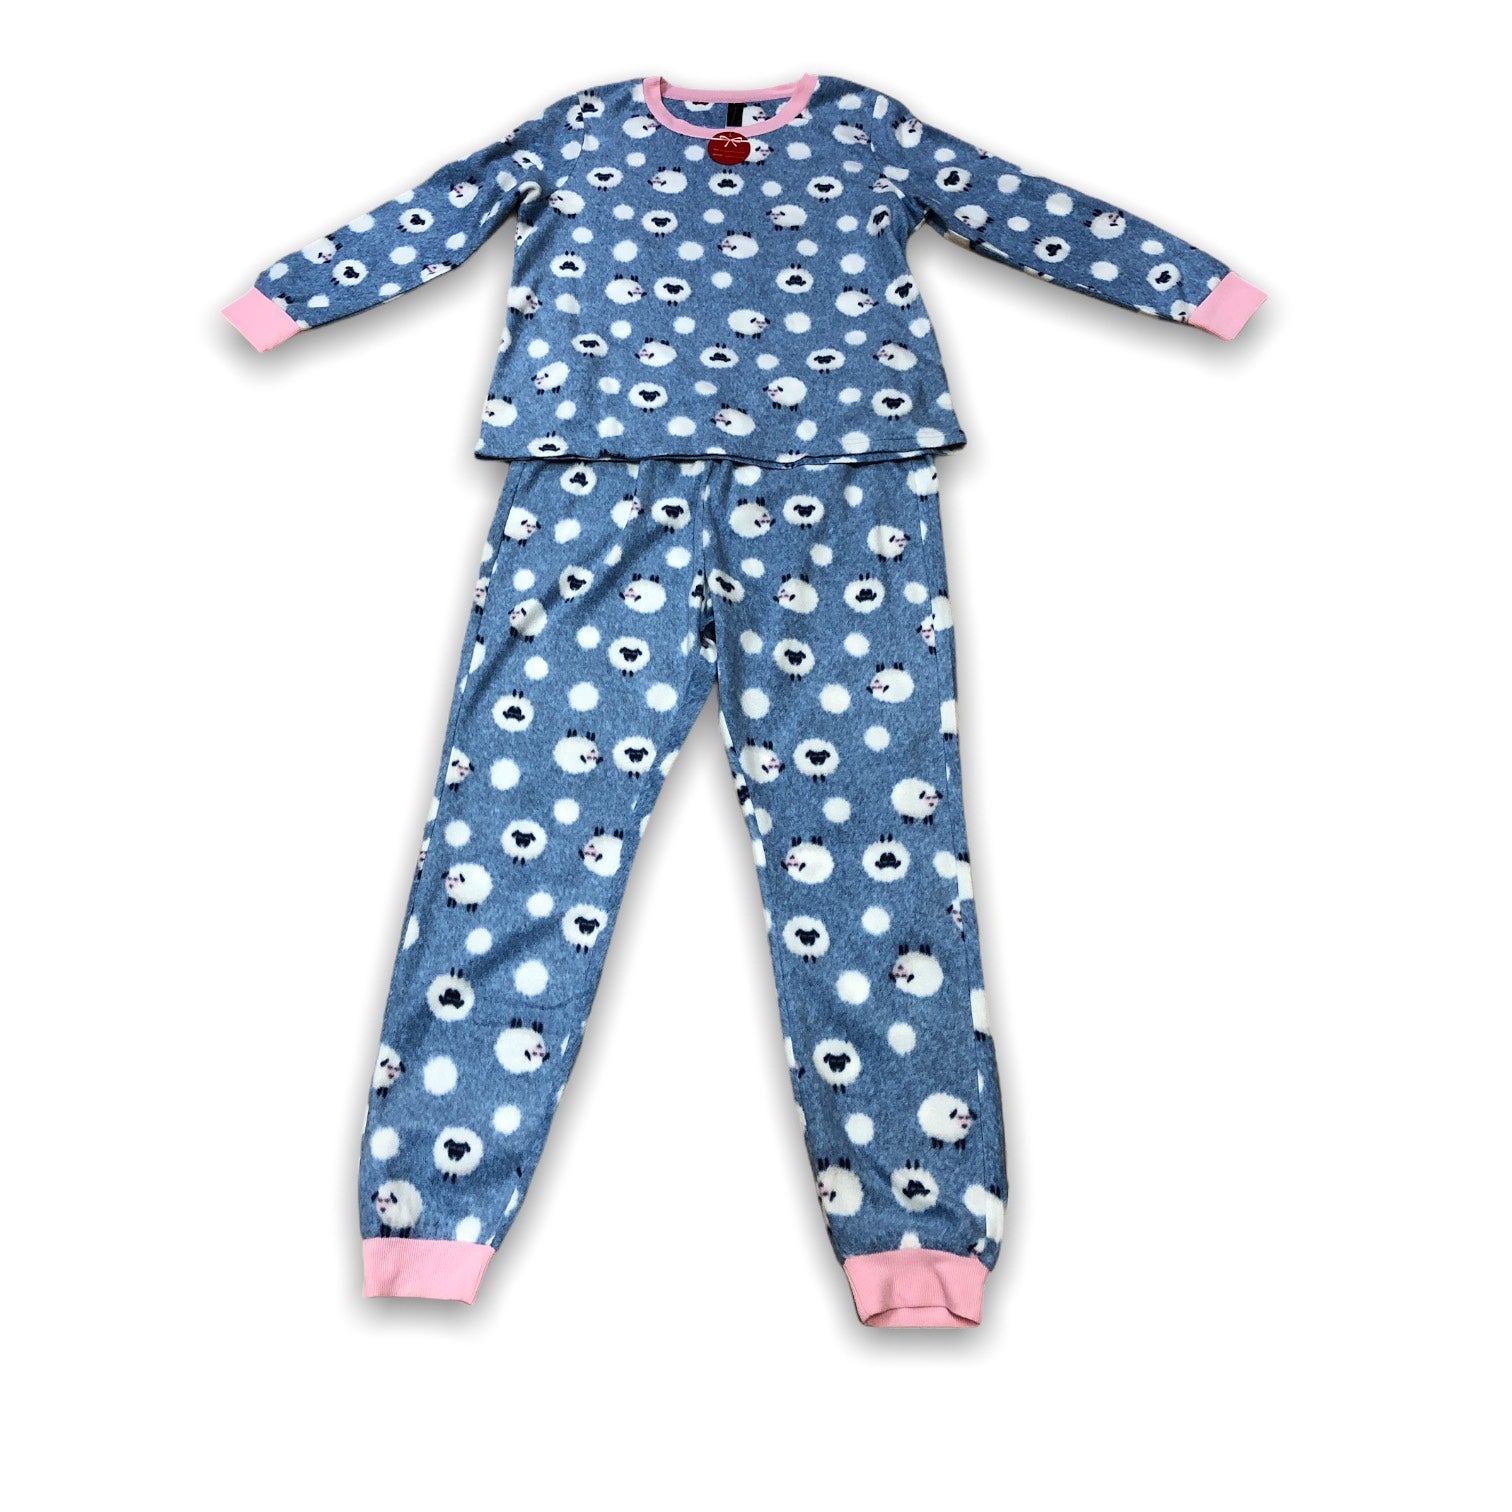 Women's Polyester Micropolar Pajama Gift Set with Cuffs